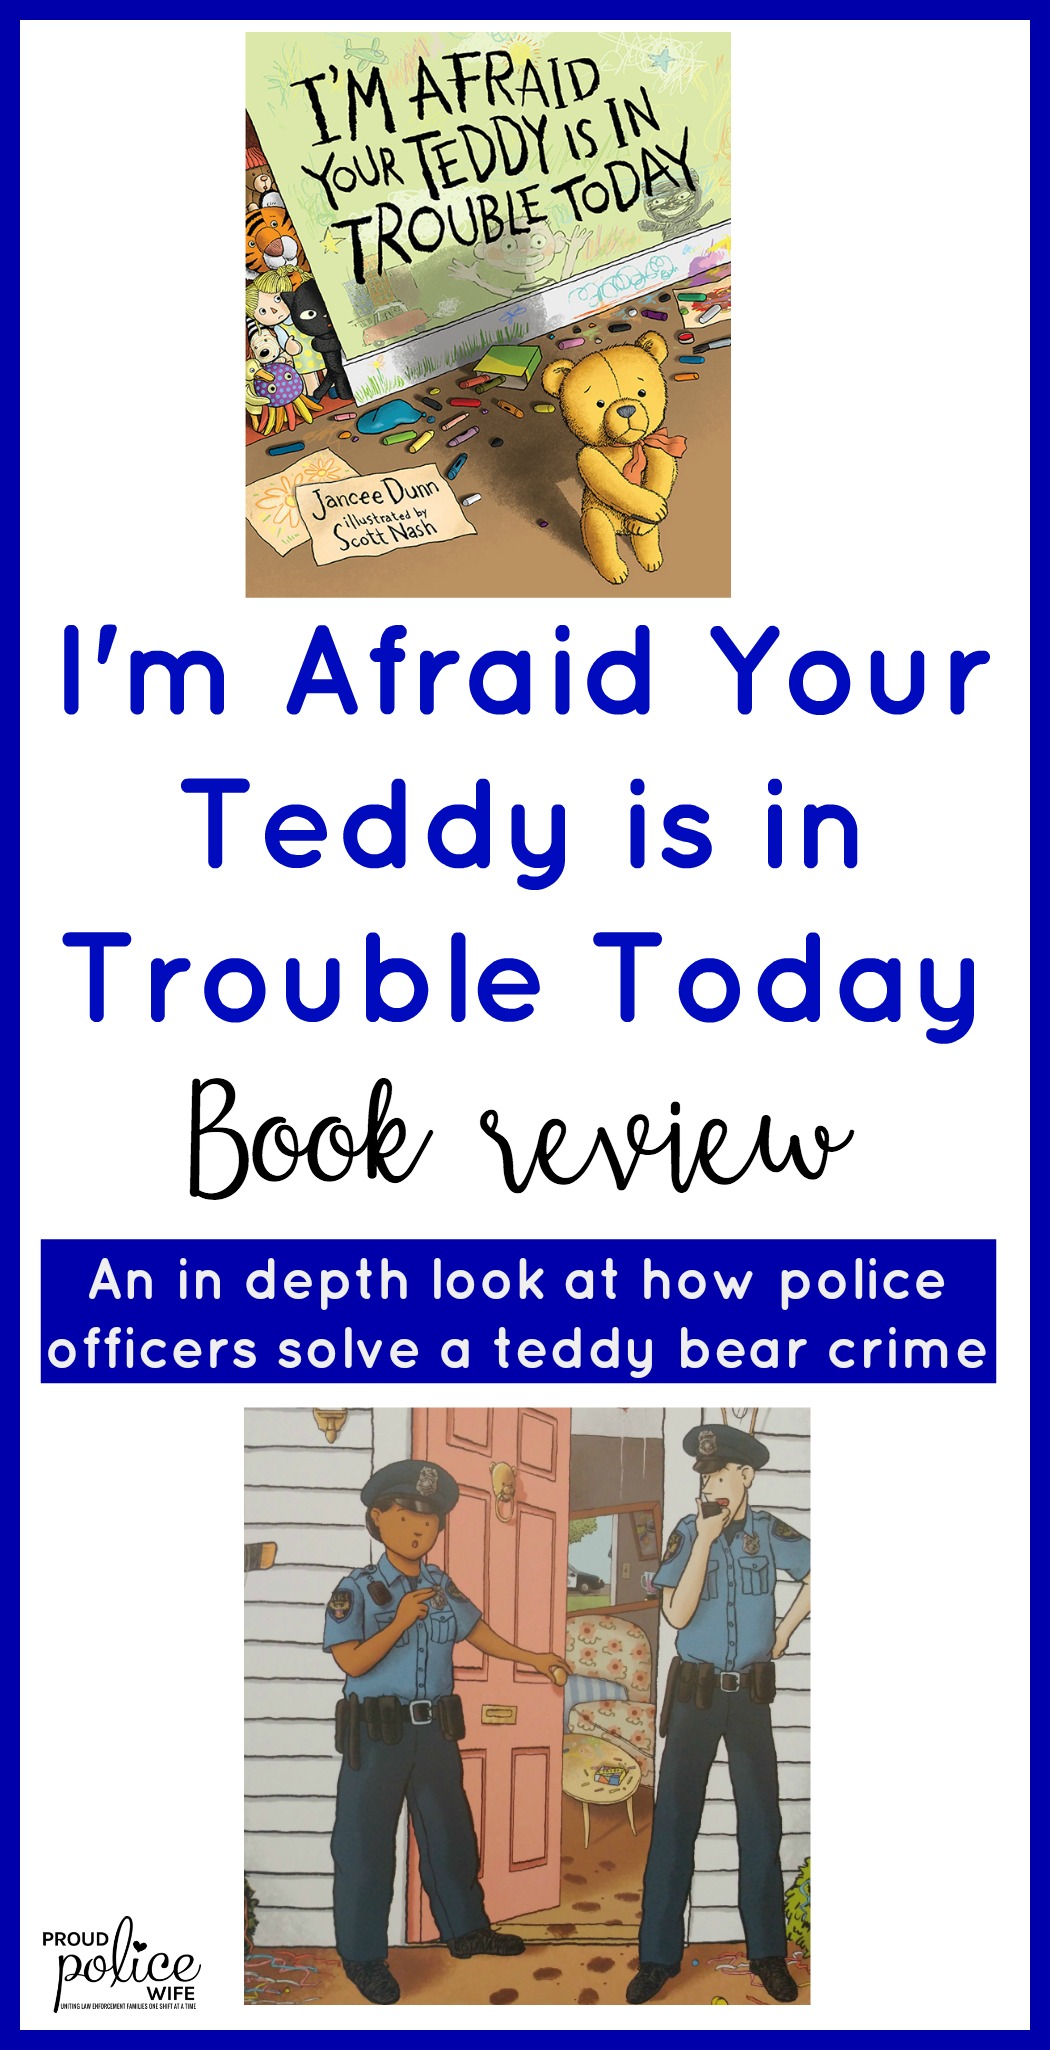 I'm Afraid Your Teddy is in Trouble Today Book Review